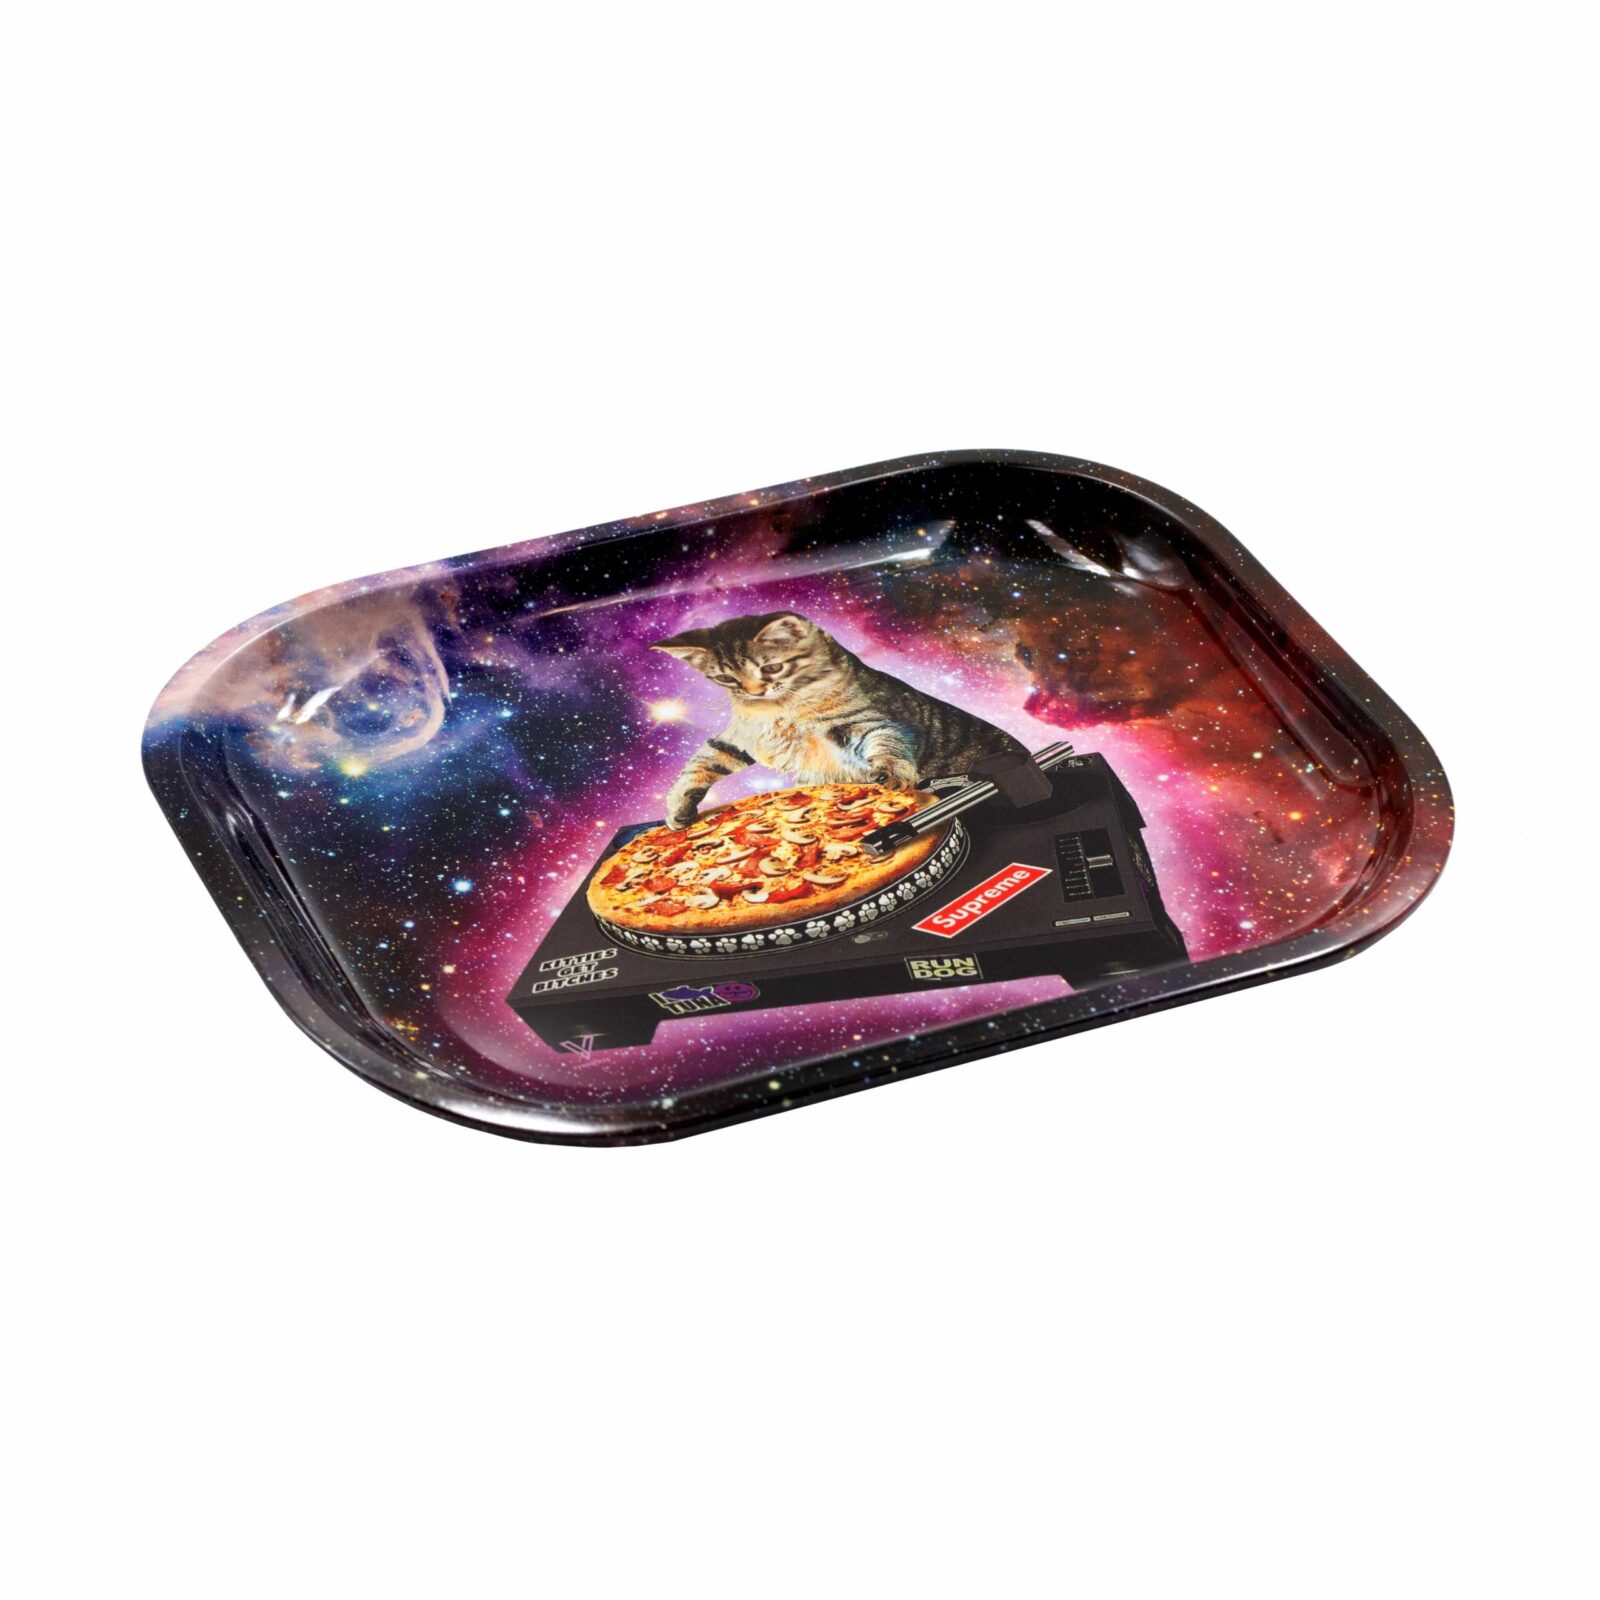 pussy vinyl square rolling tray side image